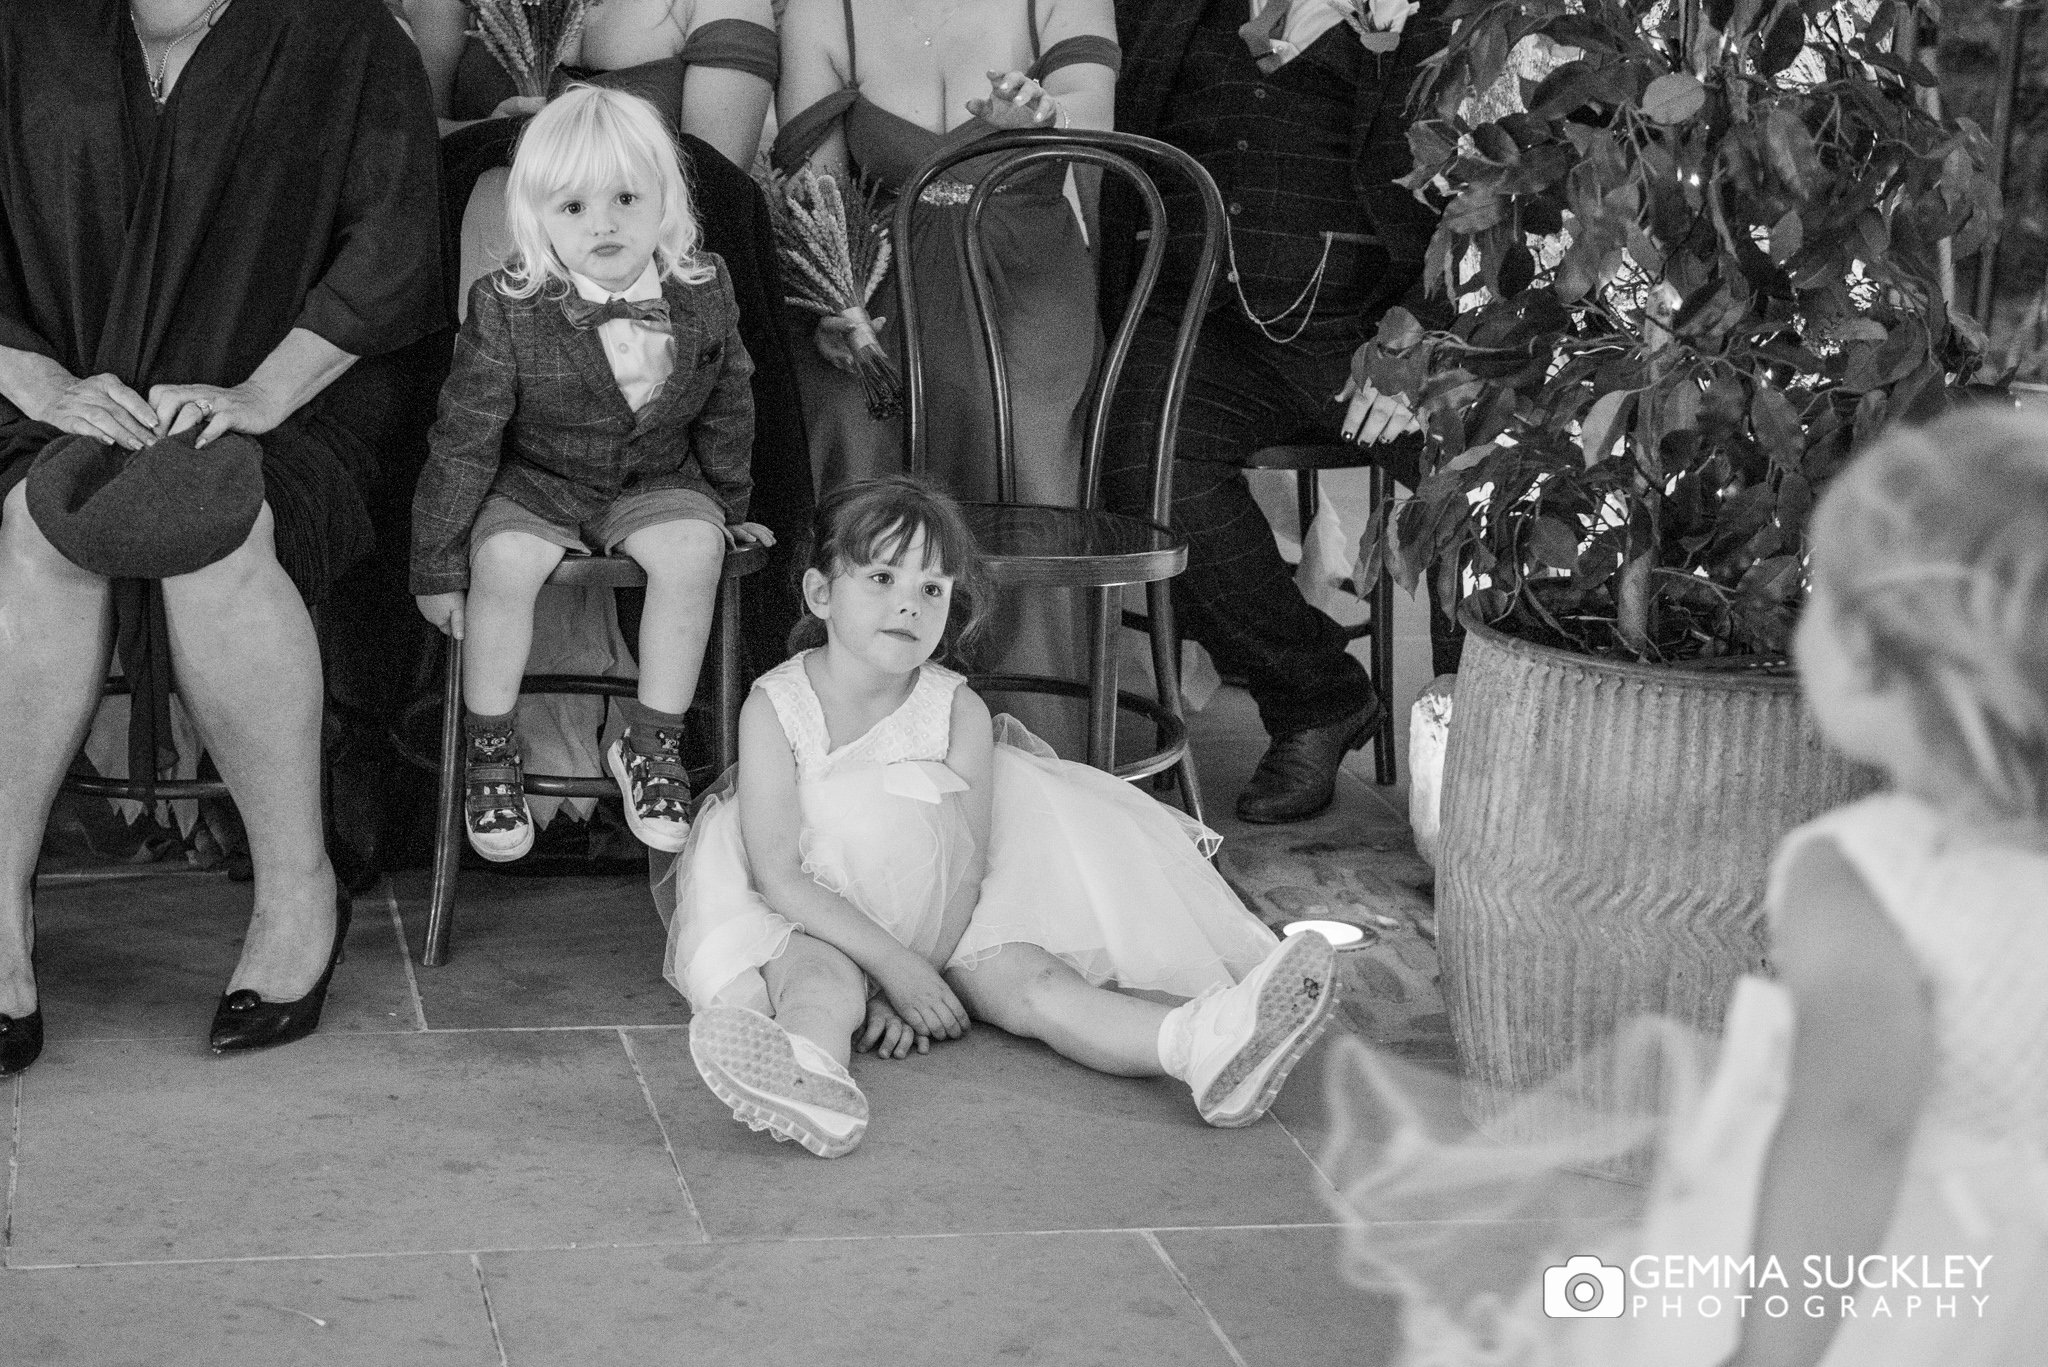 flower girl sitting on the flower during a wedding ceremony